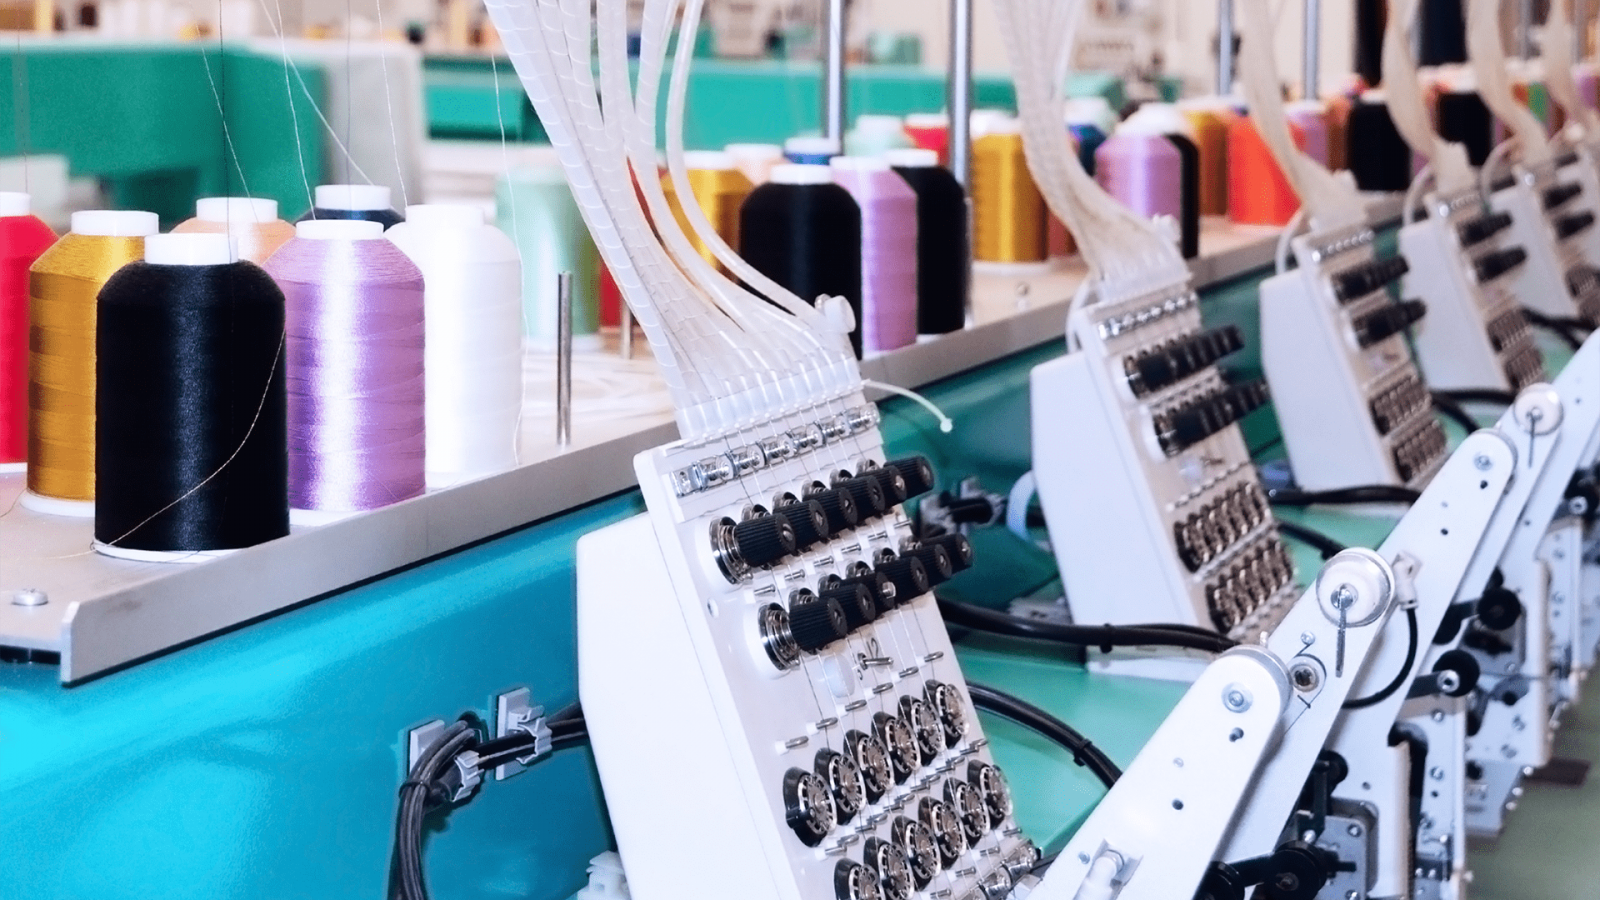 hip pocket embroidery machine and threads - hip pocket workwear & safety toowoomba